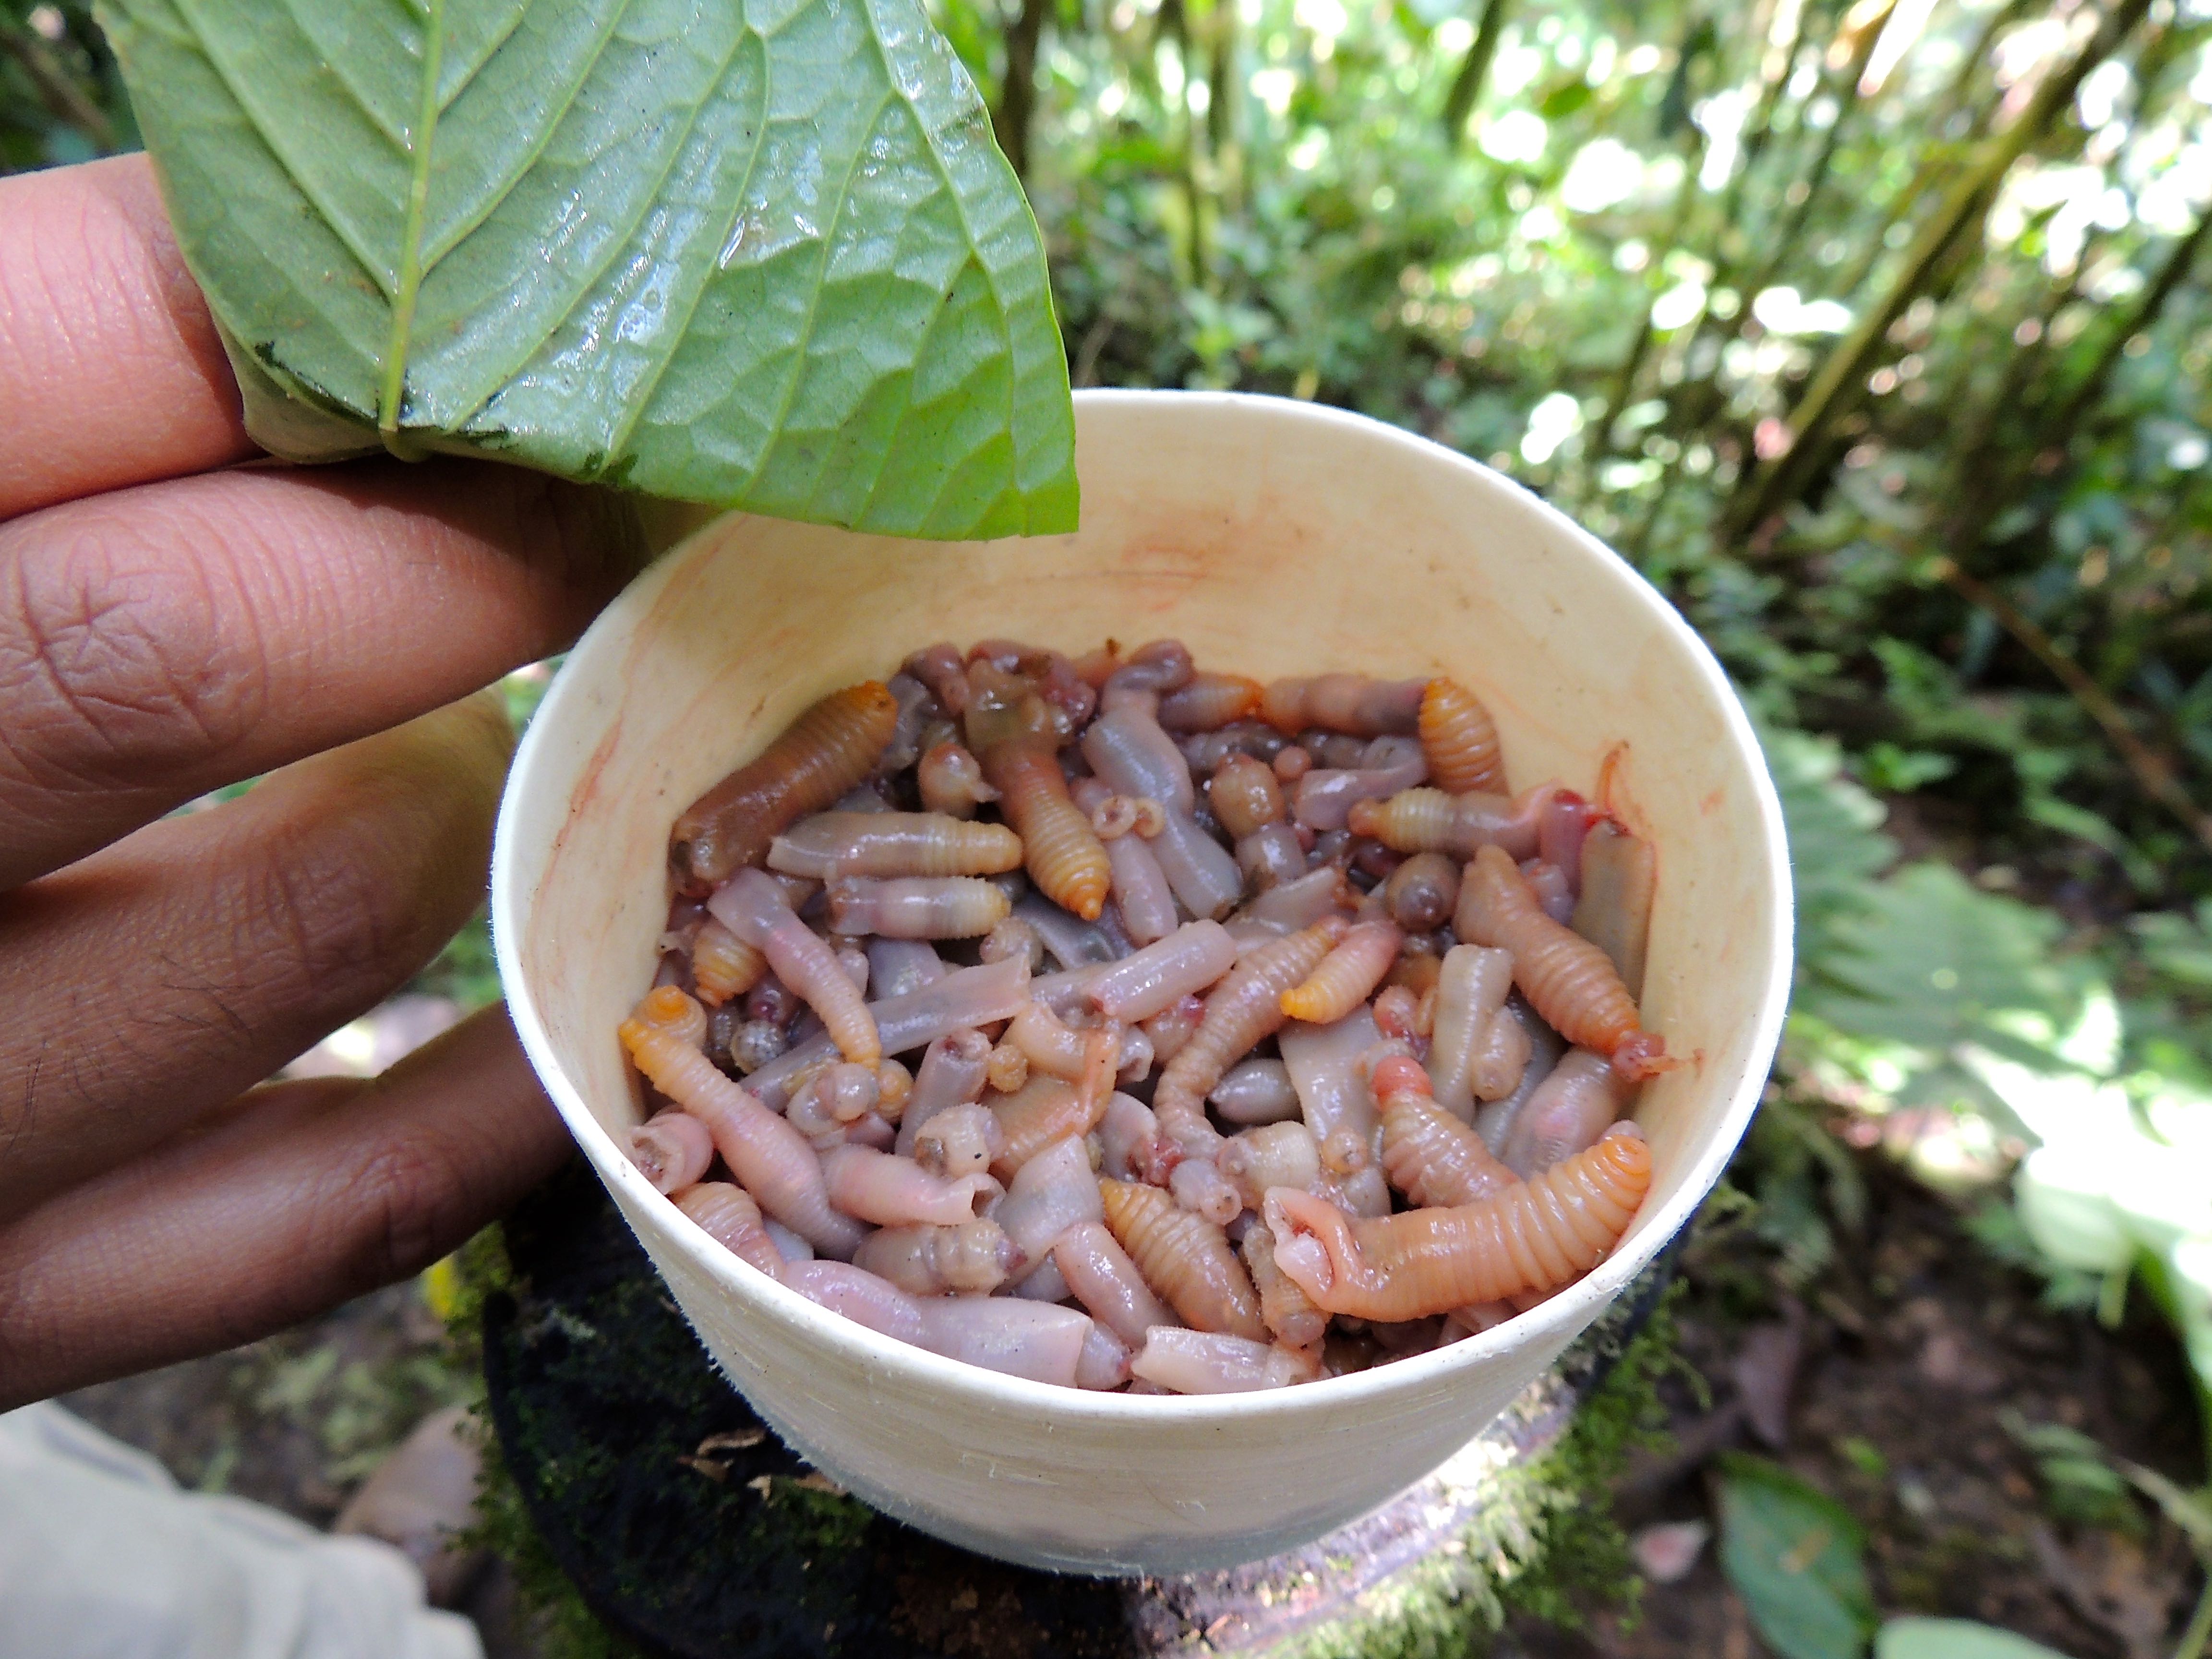 Worms for the Antpittas